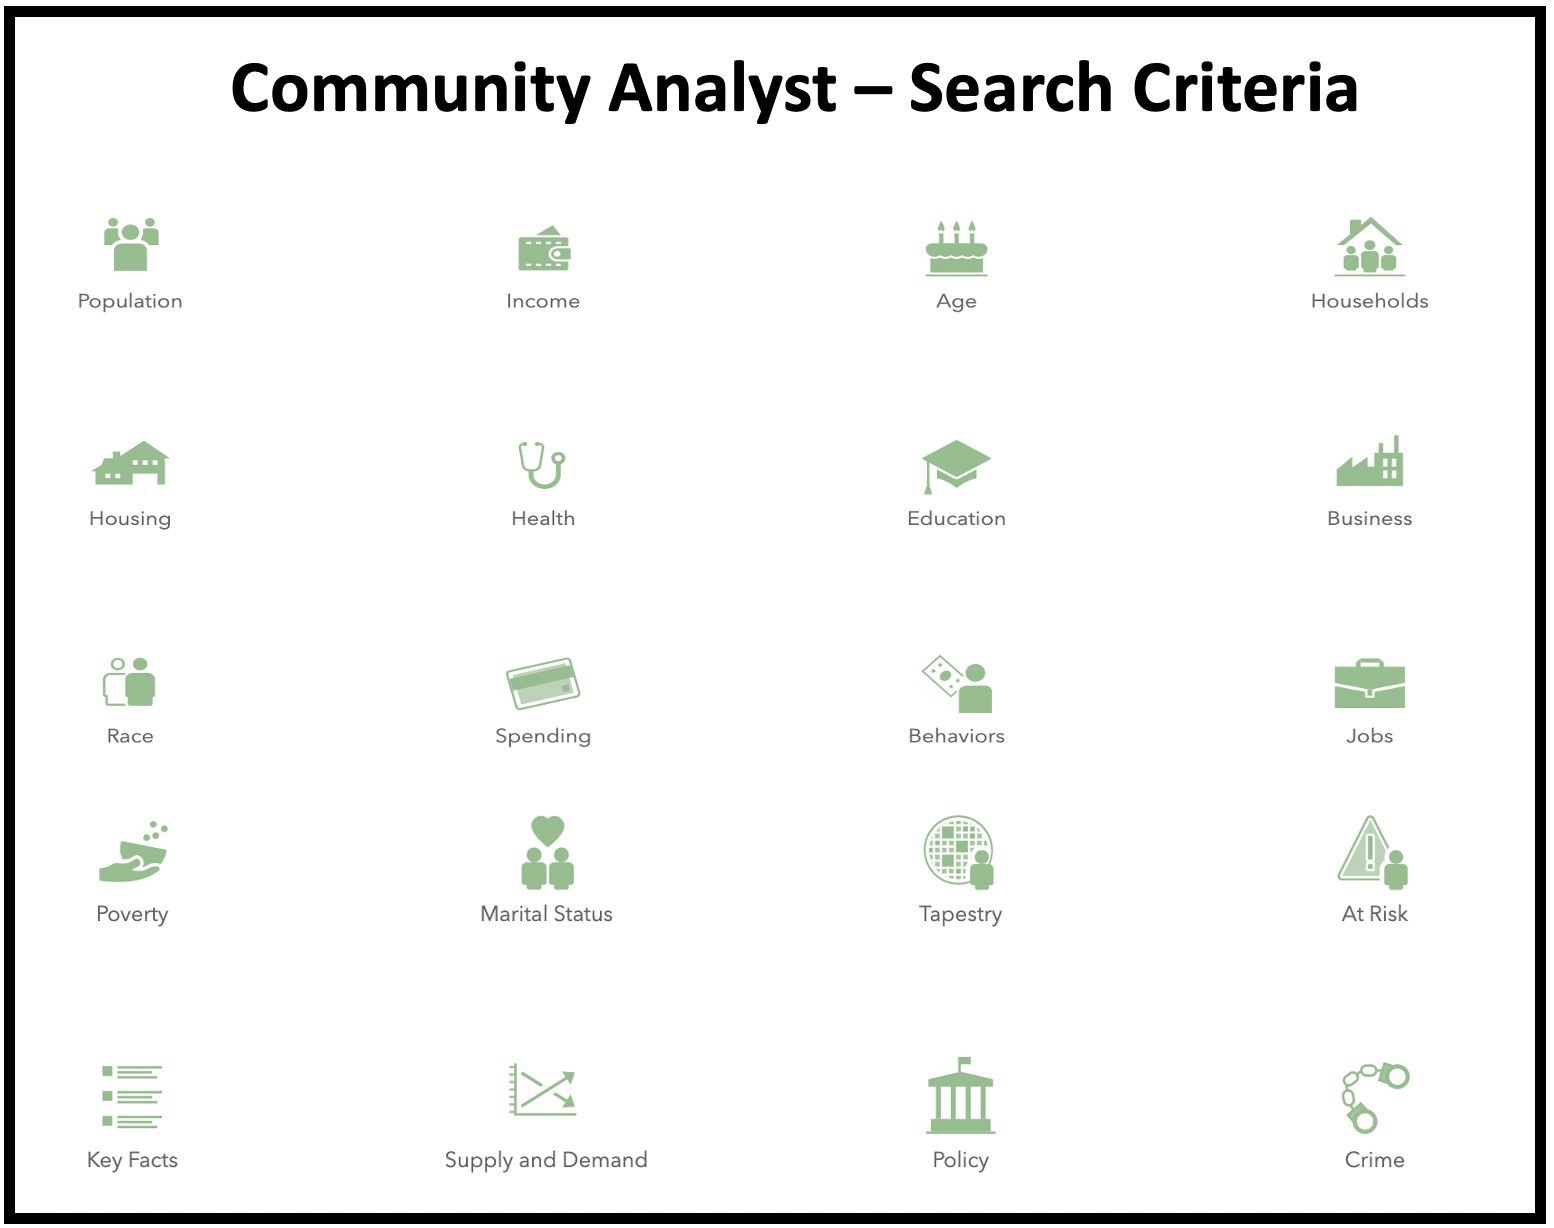 Community Analyst allows for searches by several demographic criteria